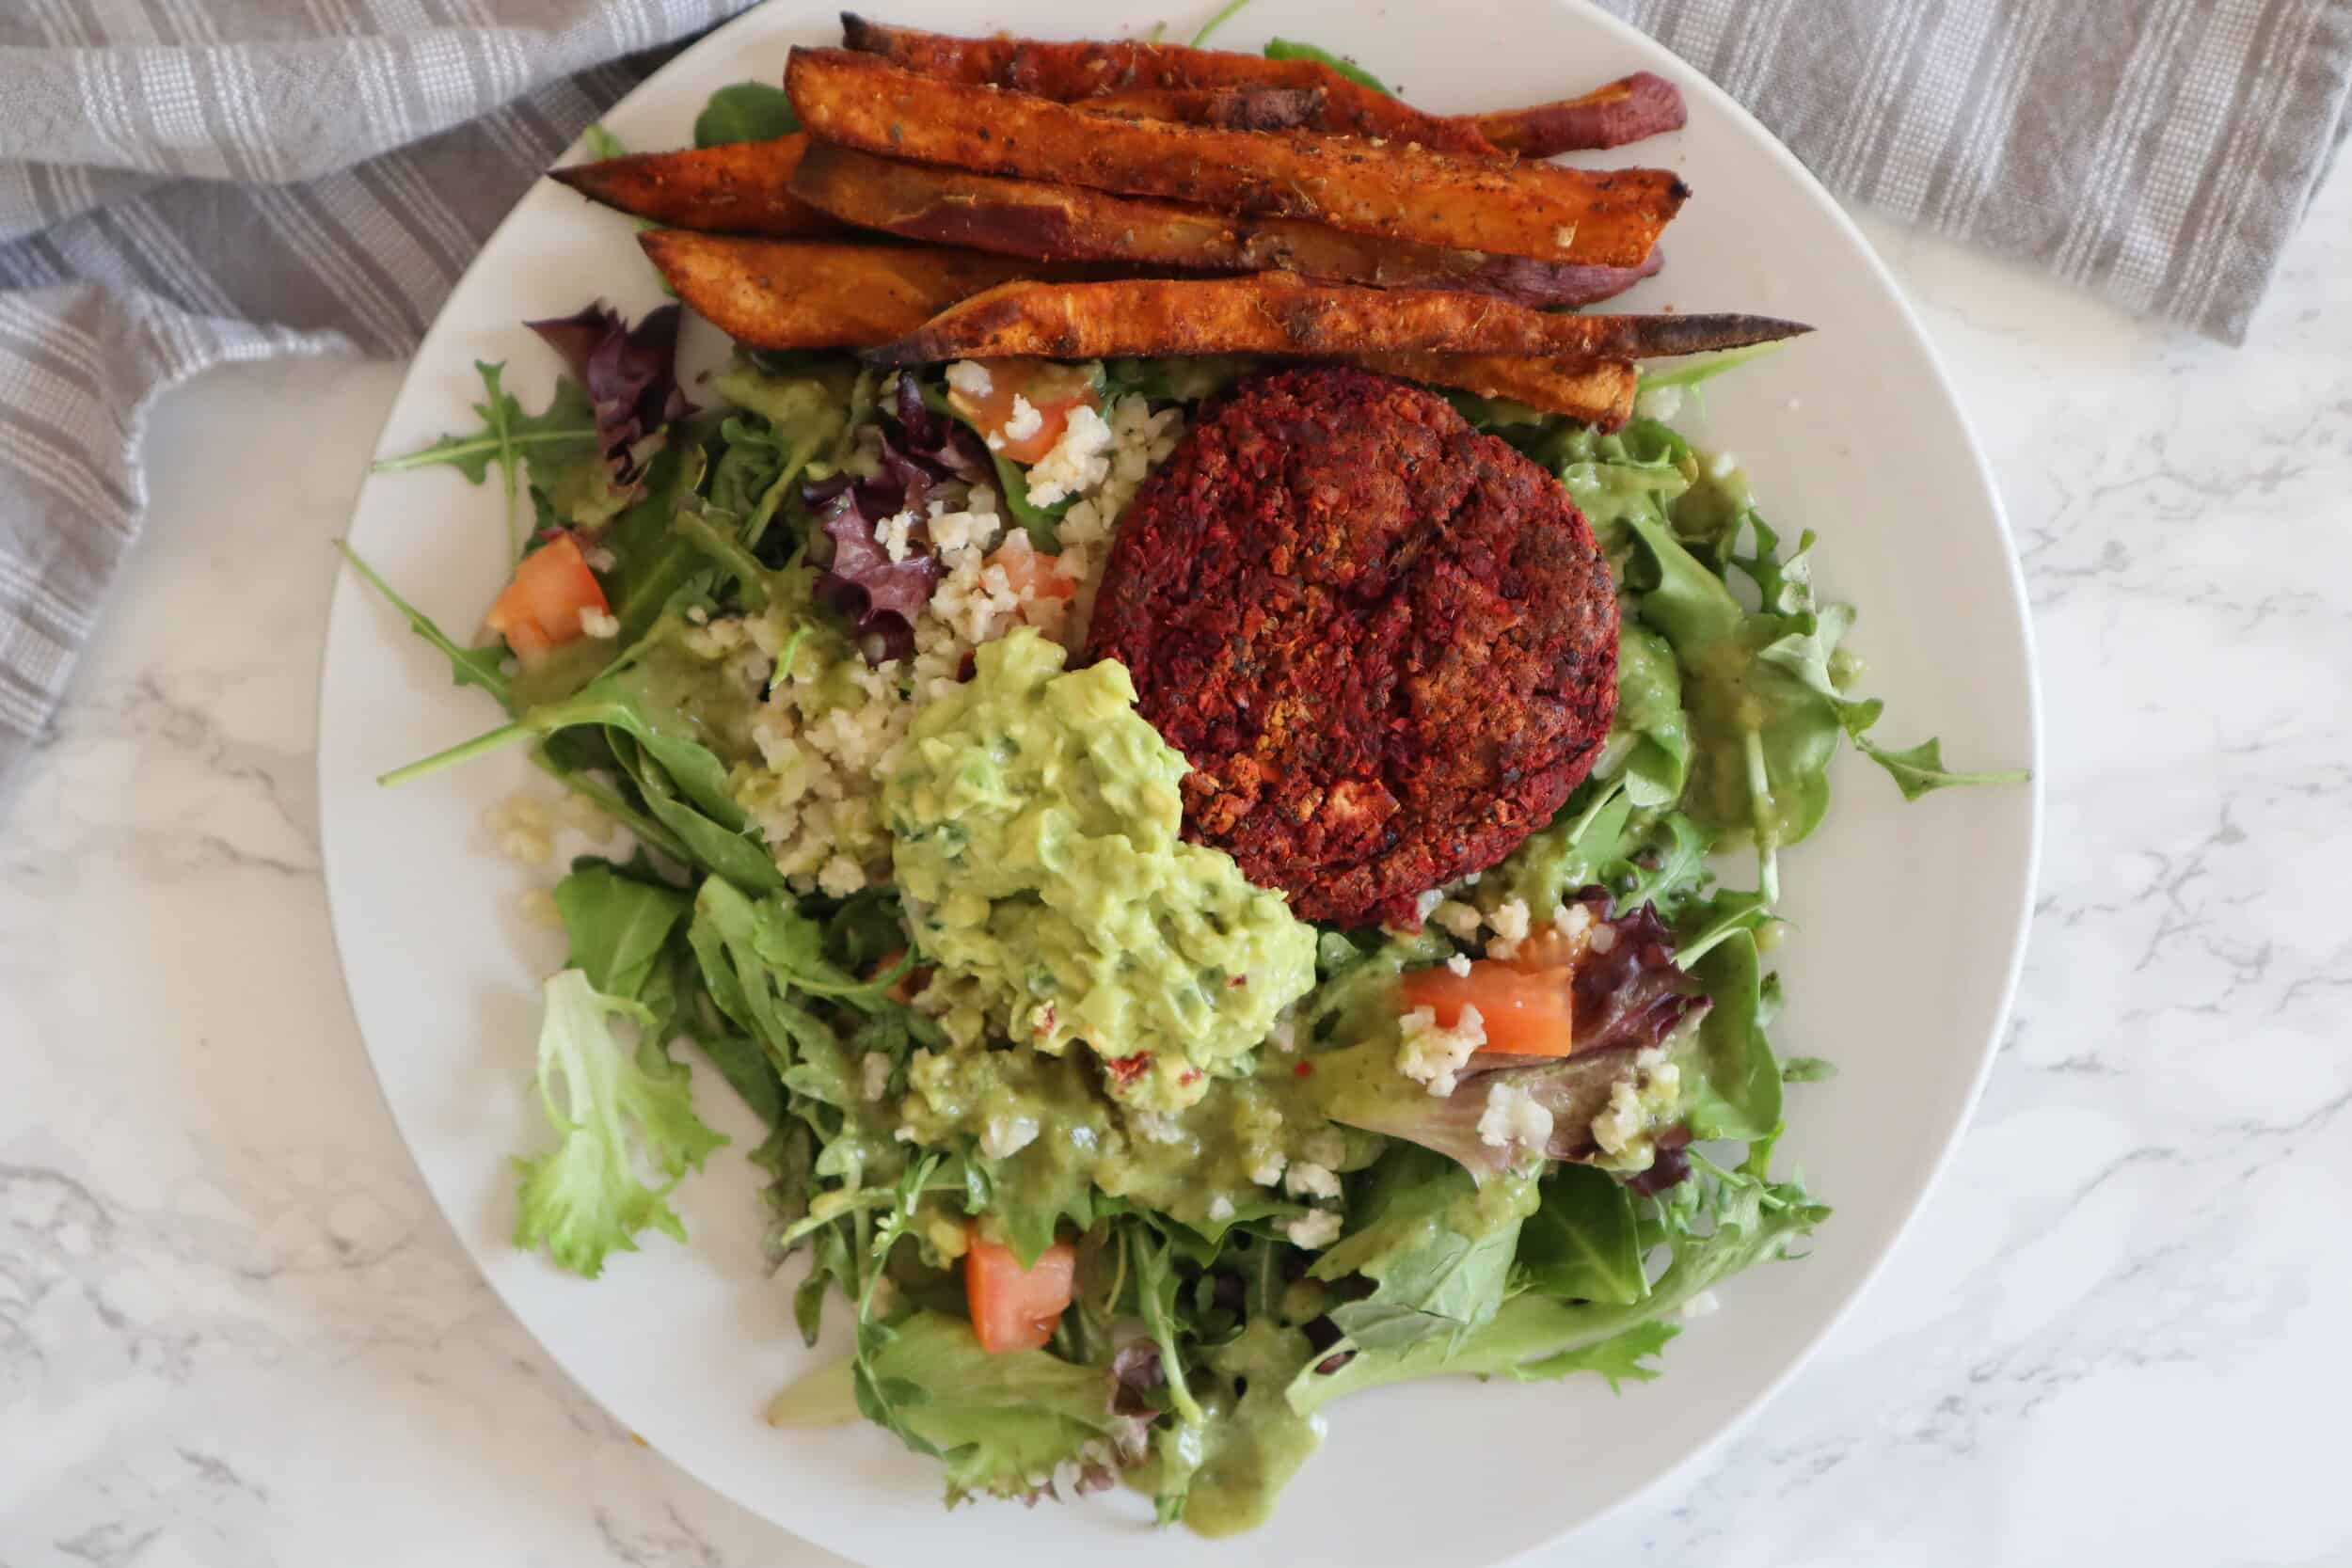 plate of salad topped with beet burger sweet potato fries and guacamole